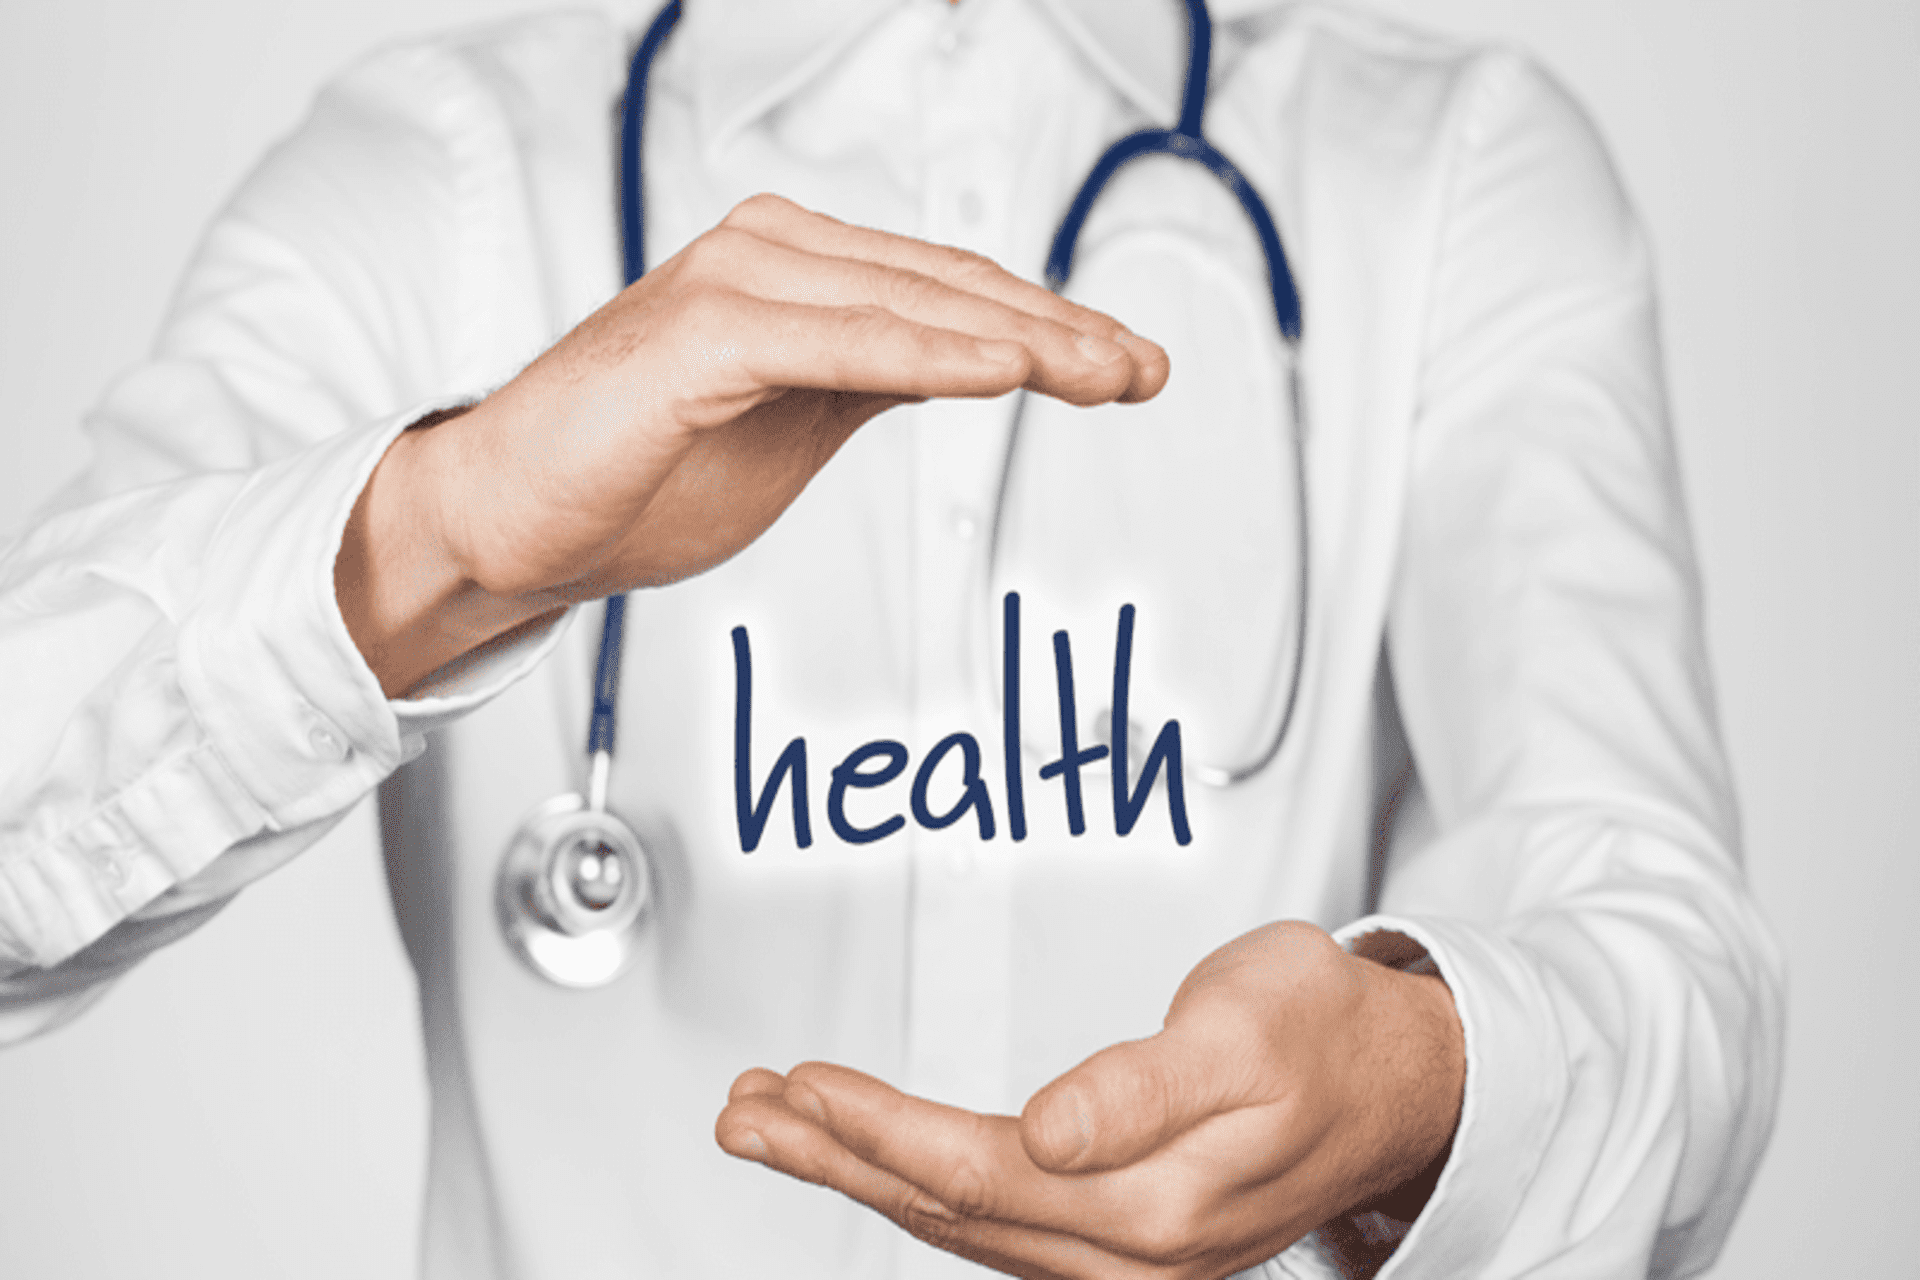 Are you still enrolled in an individual health insurance plan